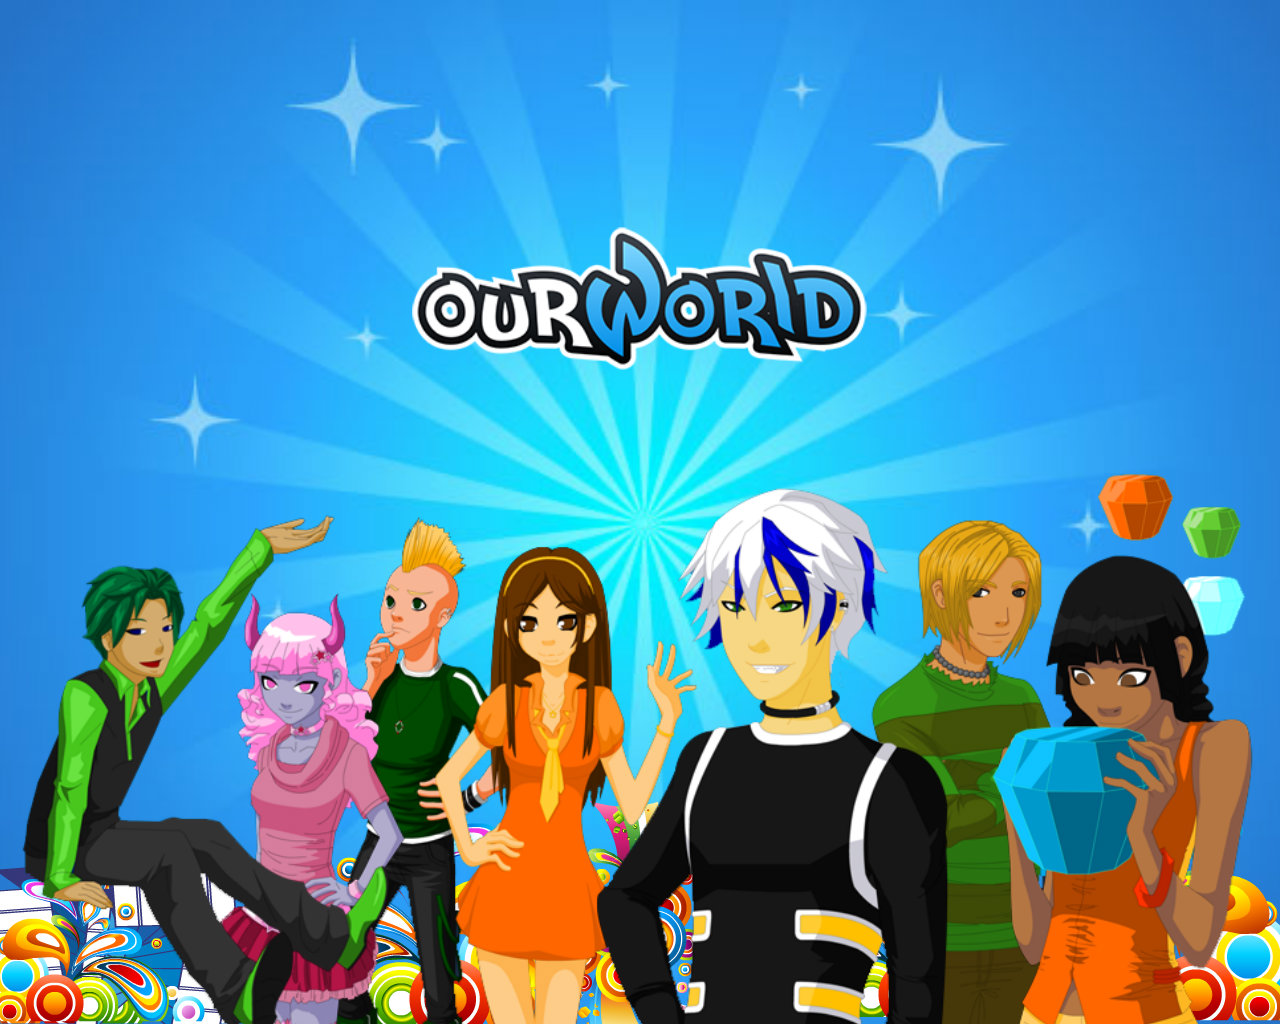 ourworld miniclips